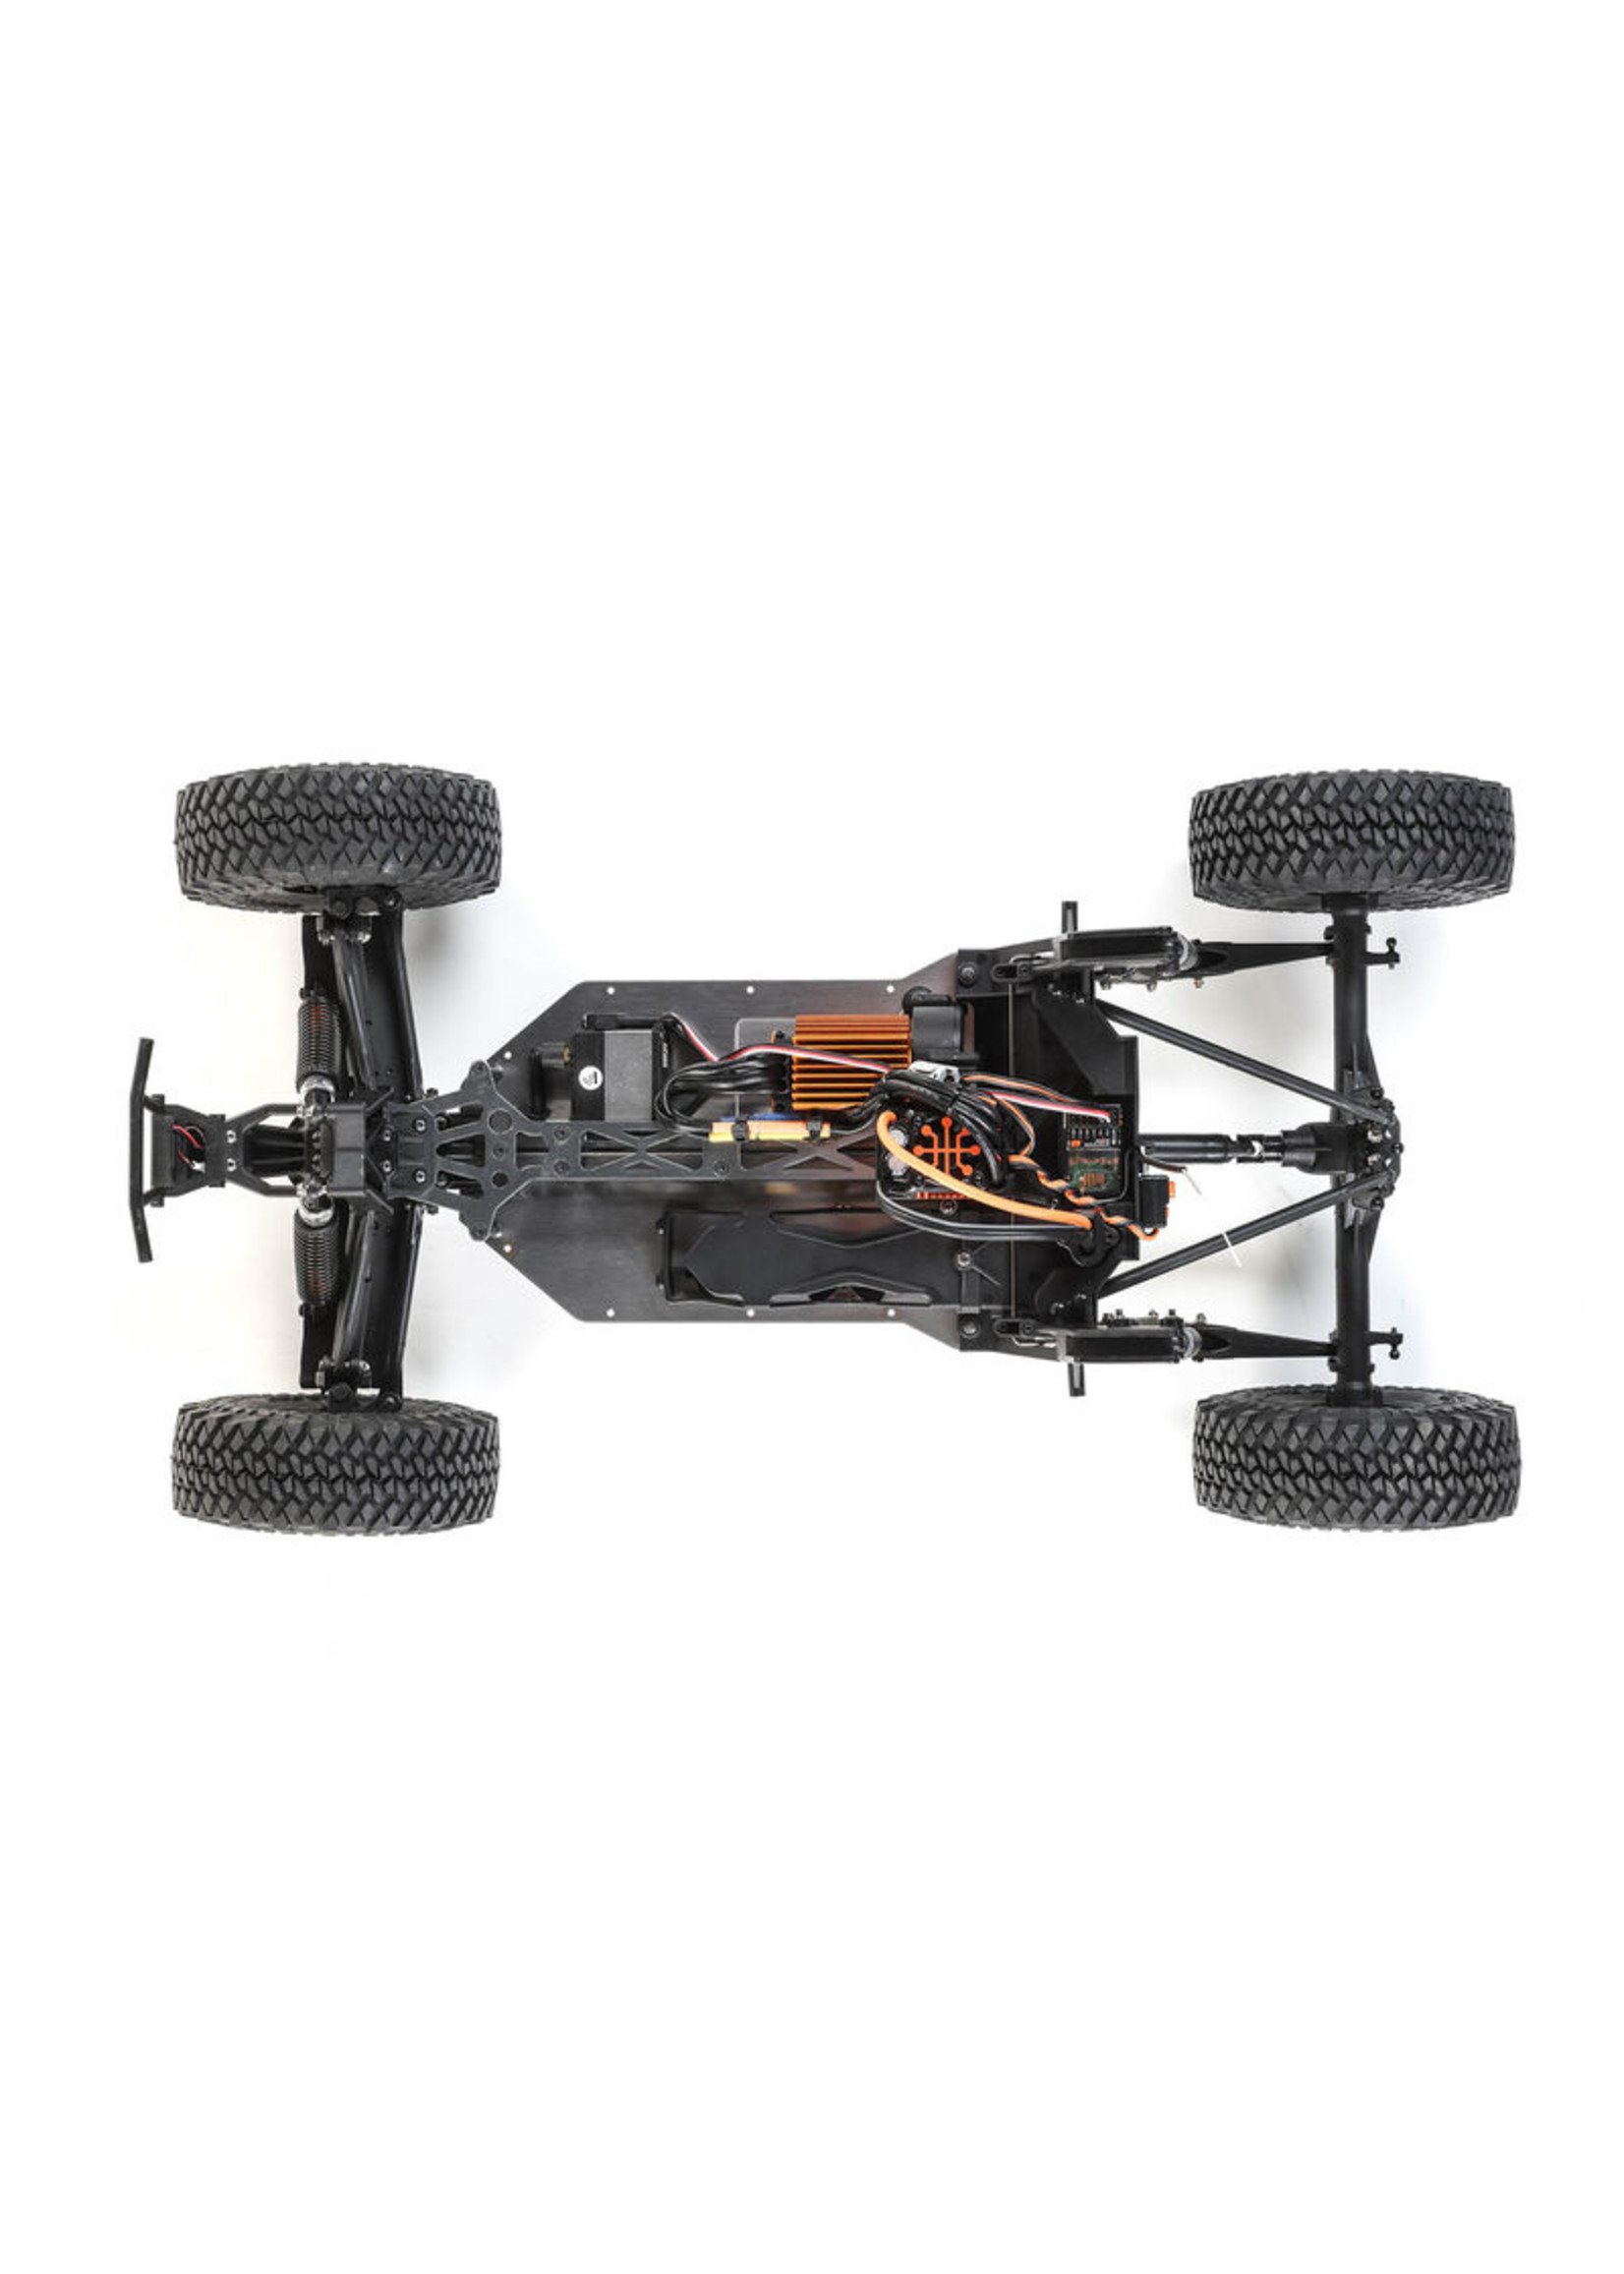 Losi LOS03030 Losi 1/10 Hammer Rey U4 4WD Rock Racer Brushless RTR with Smart and AVC